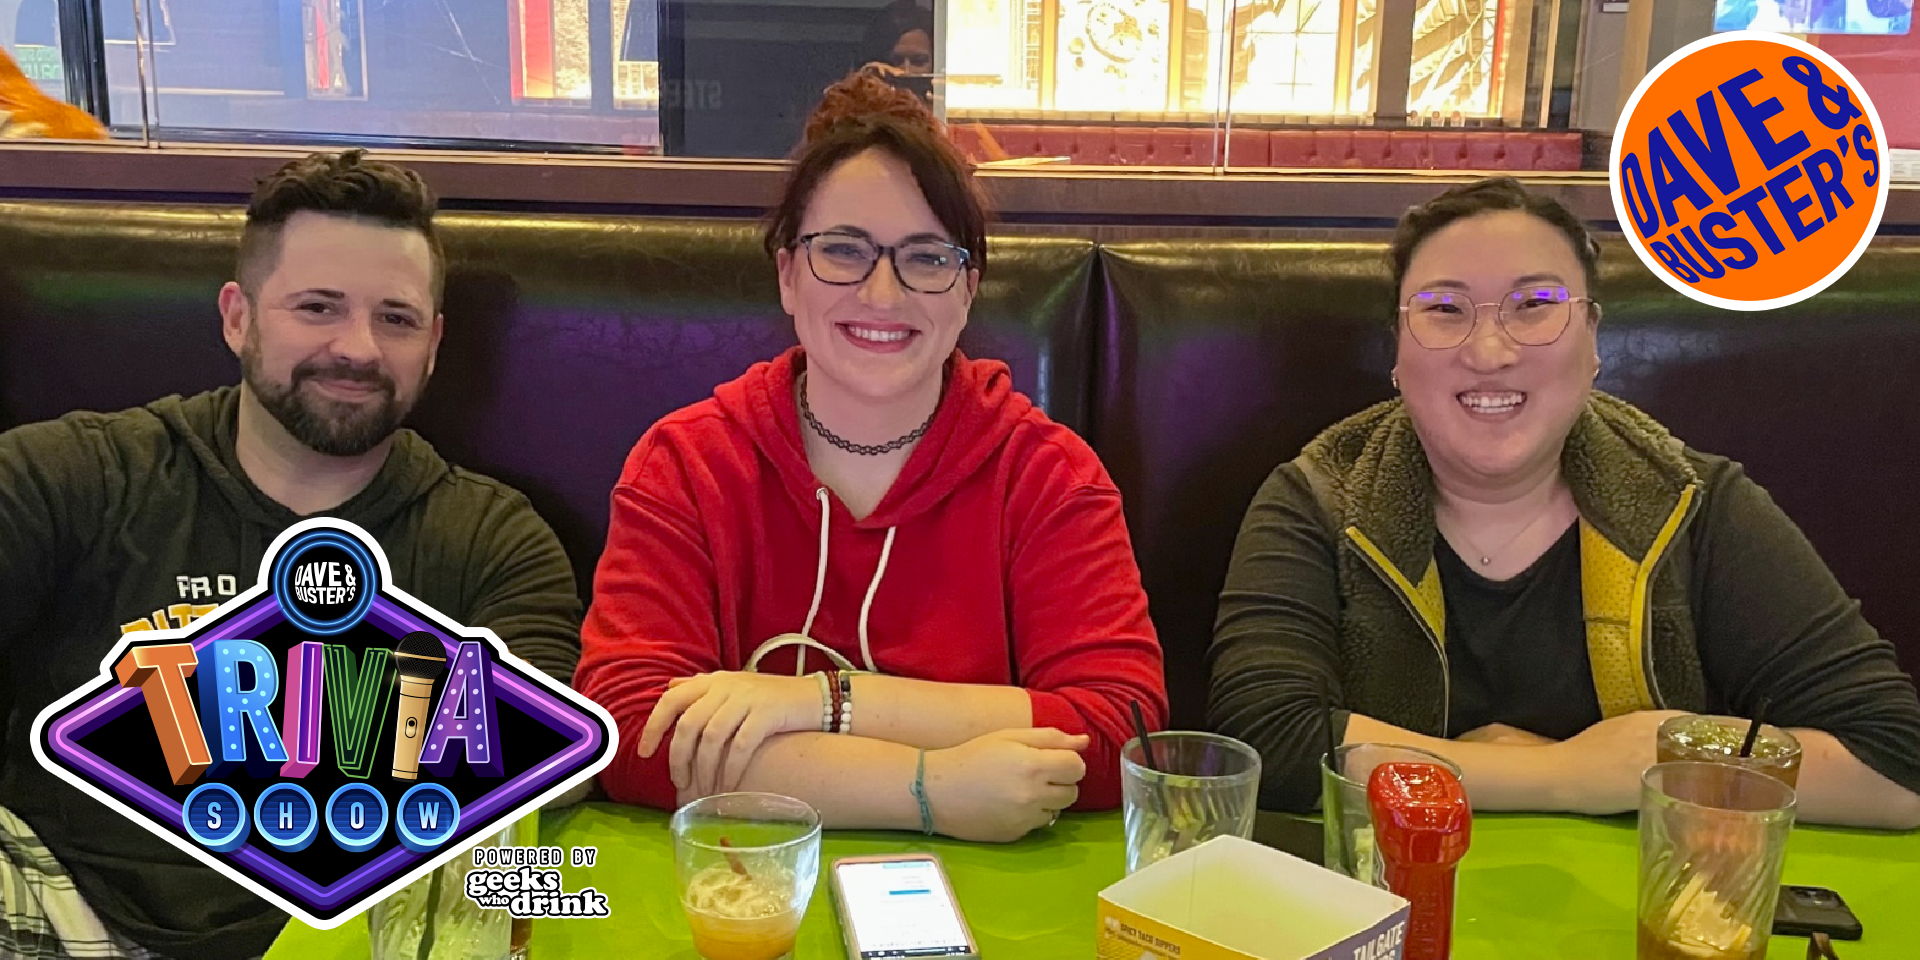 Geeks Who Drink Trivia Night at Dave and Buster's - Salt Lake City promotional image